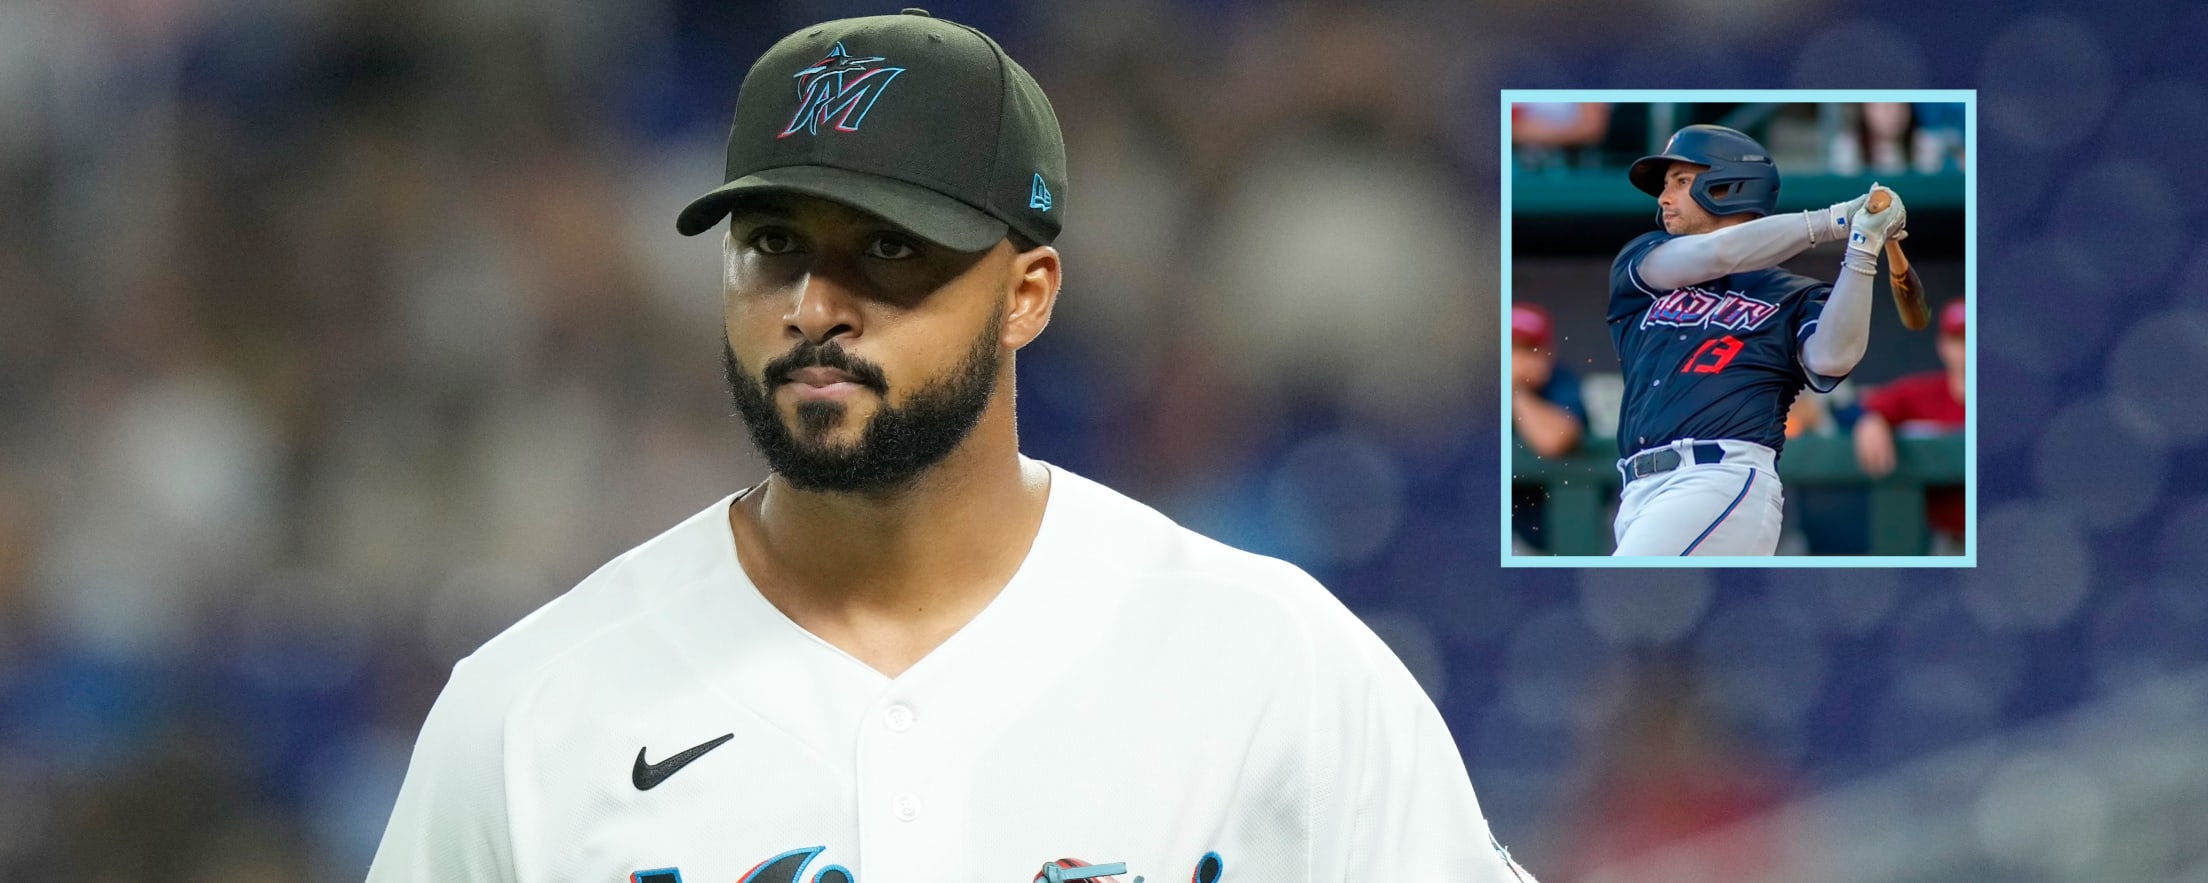 5 Marlins storylines to watch entering 2021 Spring Training - Fish